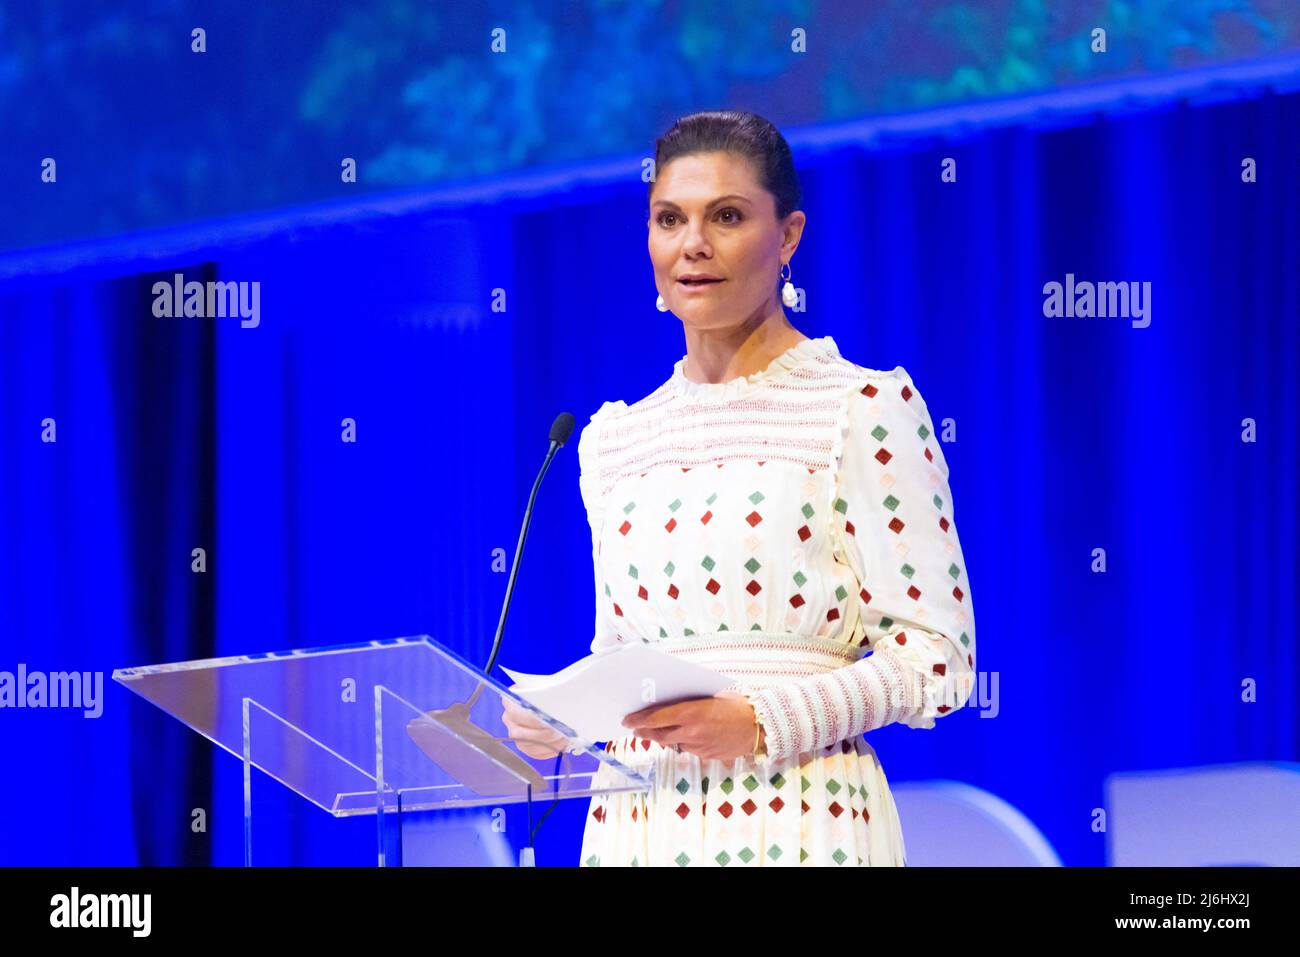 Princess Victoria at the Karolinska Institutet on the 1st day of the official 3 day visit of the Norwegian couple to Sweden. Stockholm, Sweden on April 2, 2022. Photo by Charlotte Brunzell/Stella Pictures/ABACAPRESS.COM Stock Photo